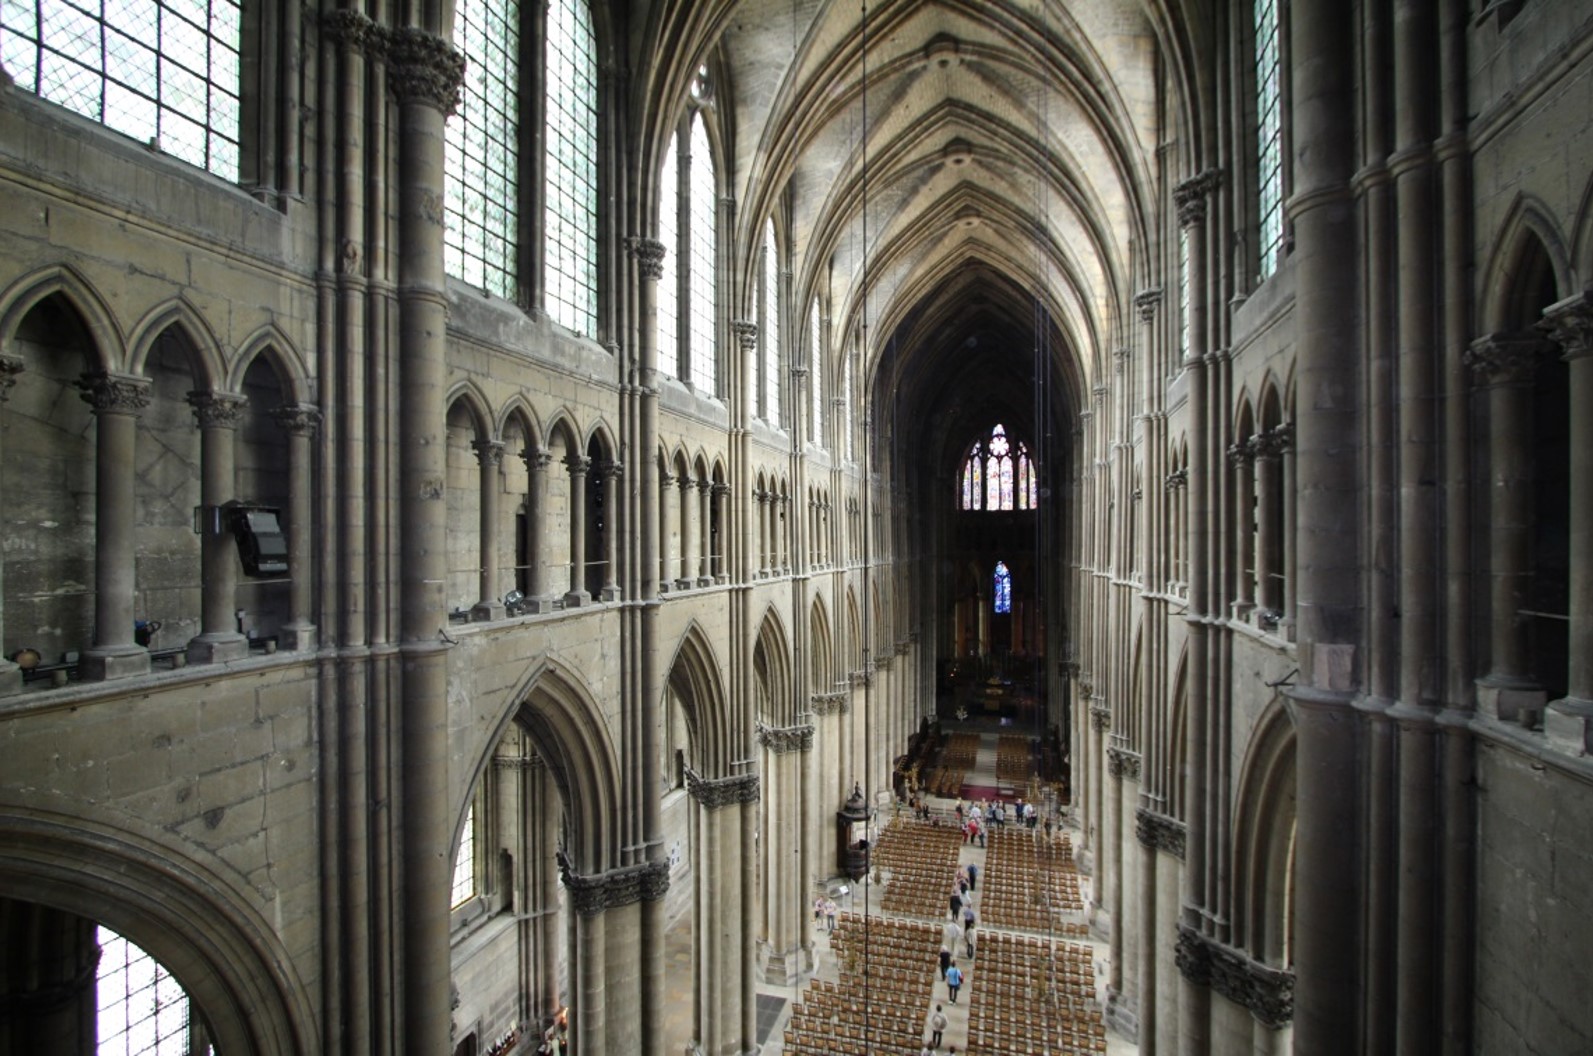 Revealing a medieval Gothic cathedral’s mysteries